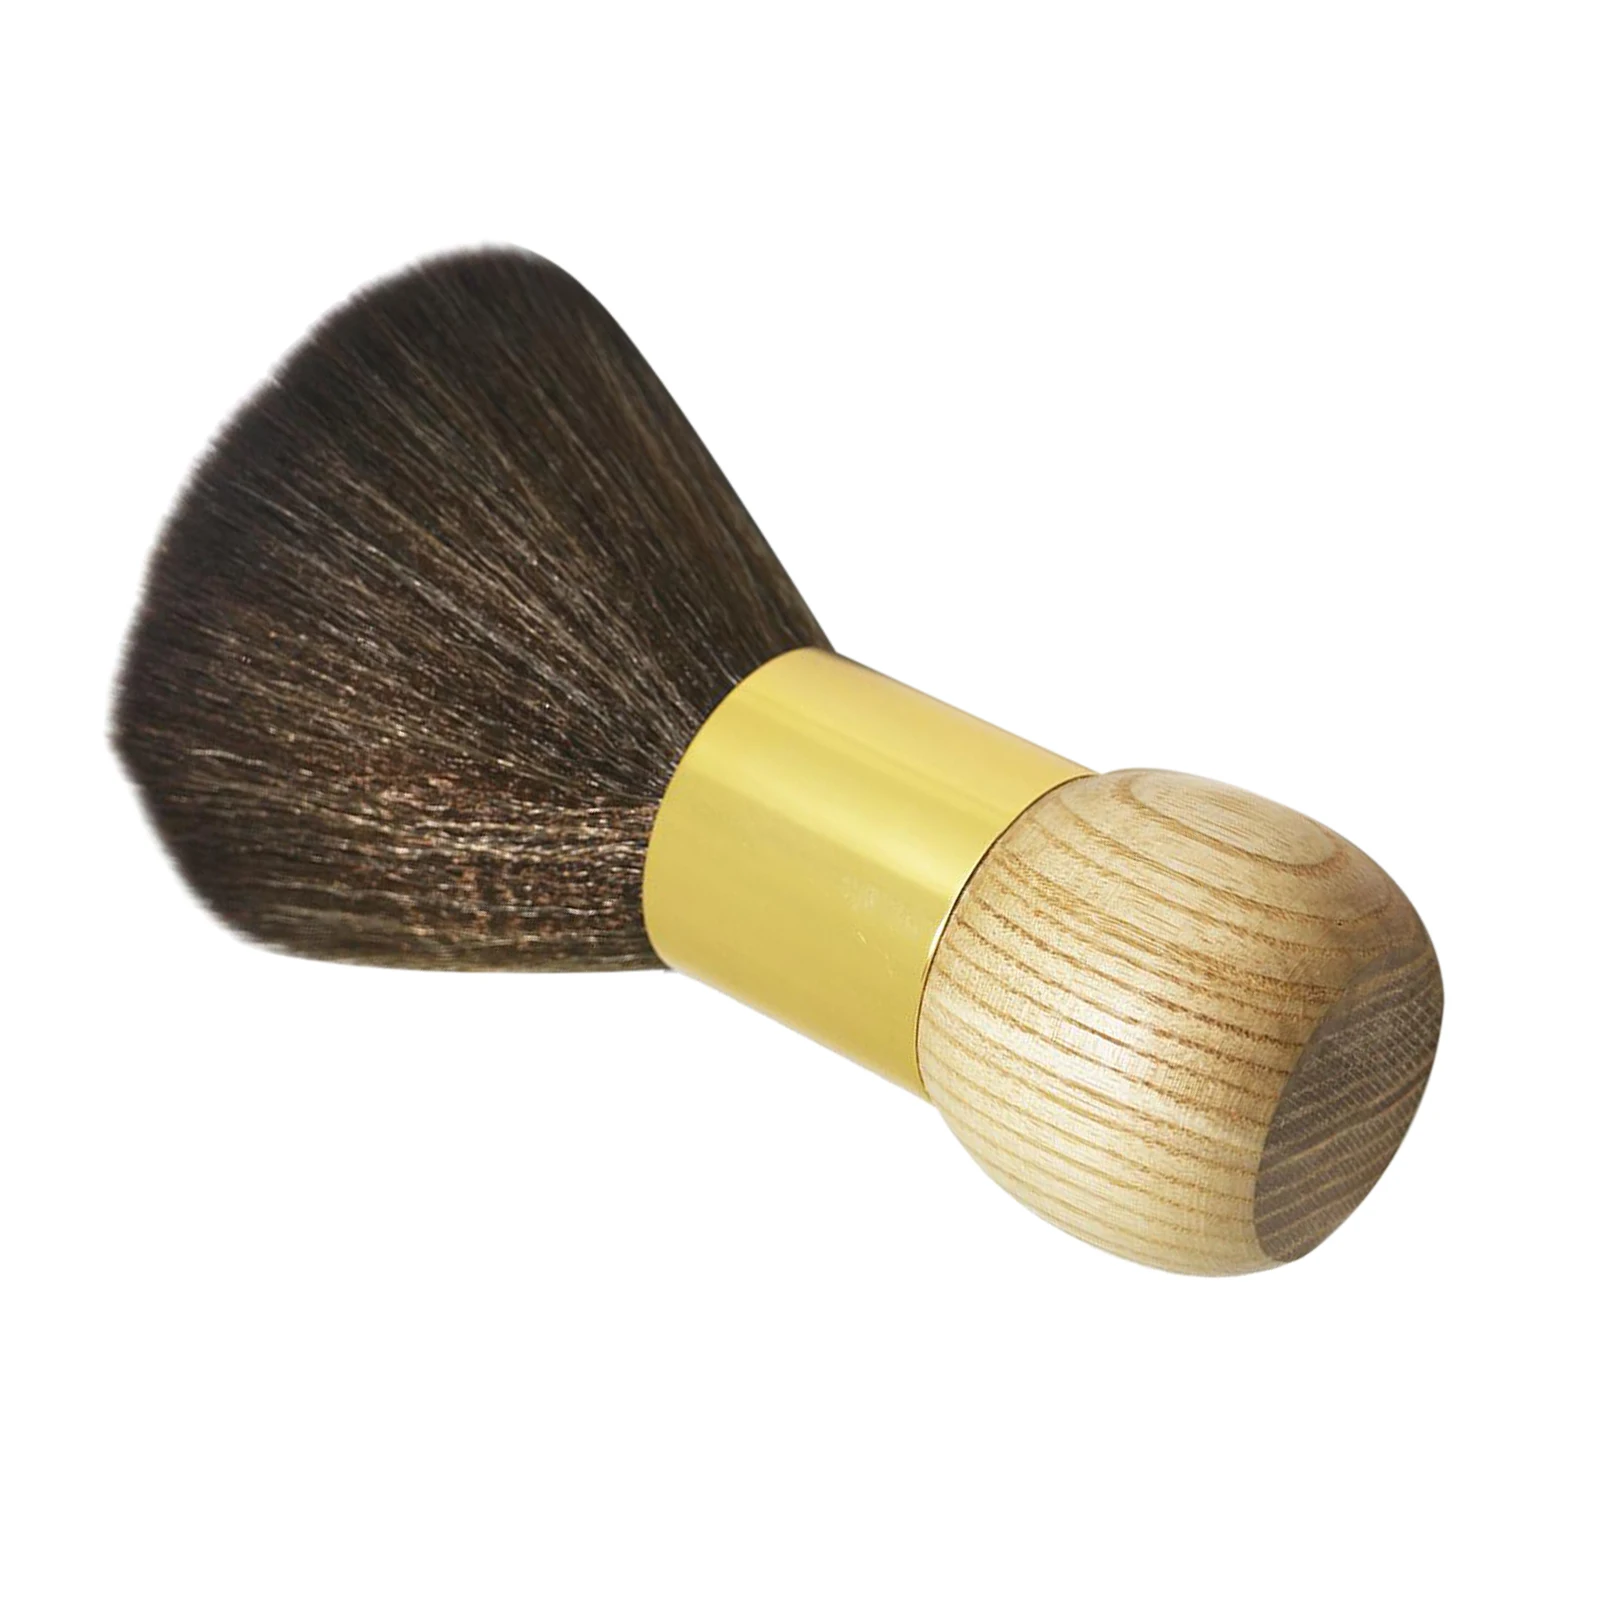 Soft Handle Wooden Hairbrush Haircut for Salon Barber Hairdressing Cleaning